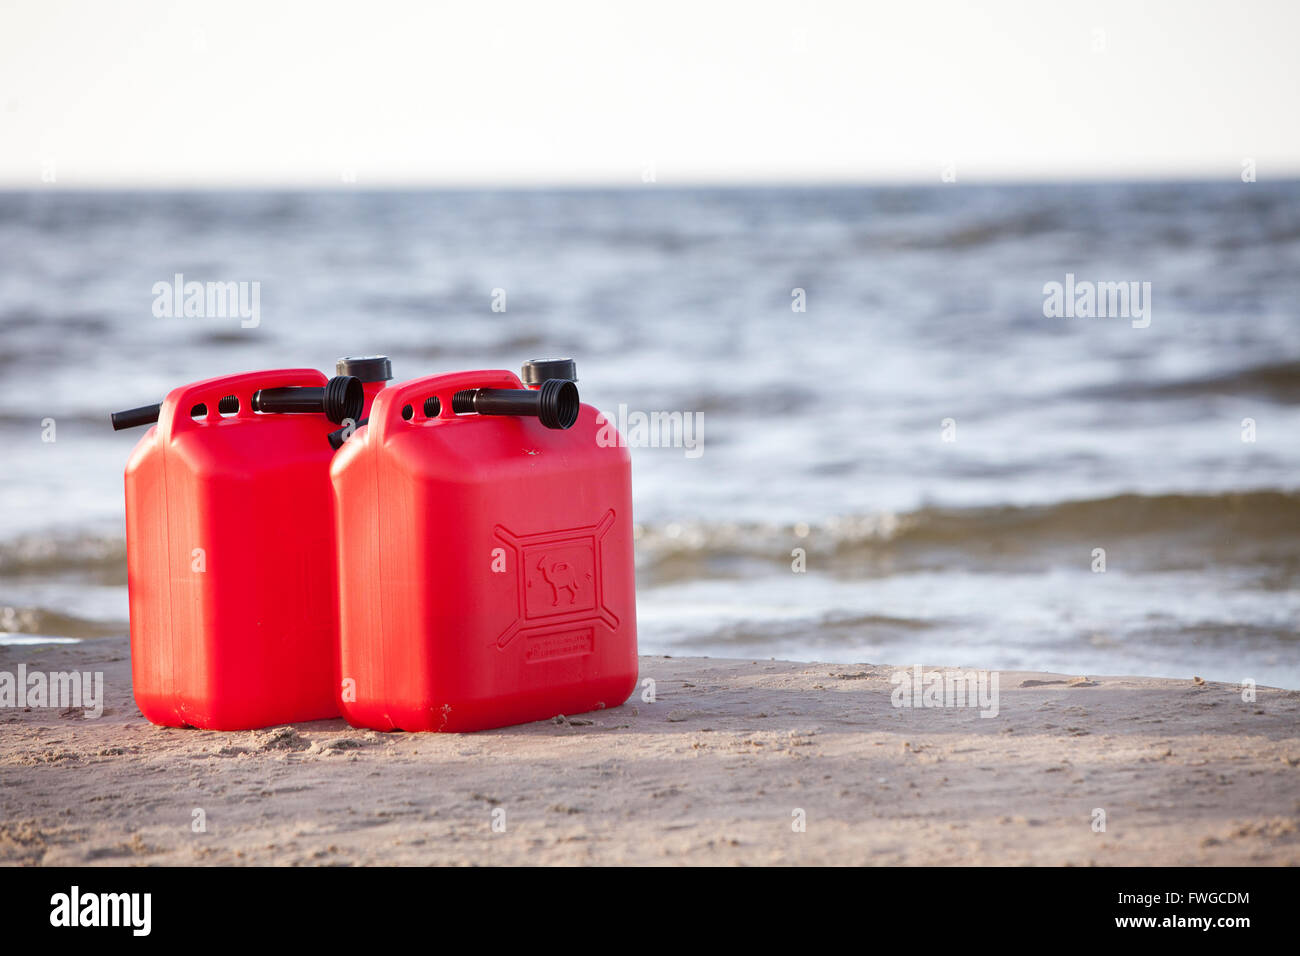 Two red fuel cans on the beach Stock Photo